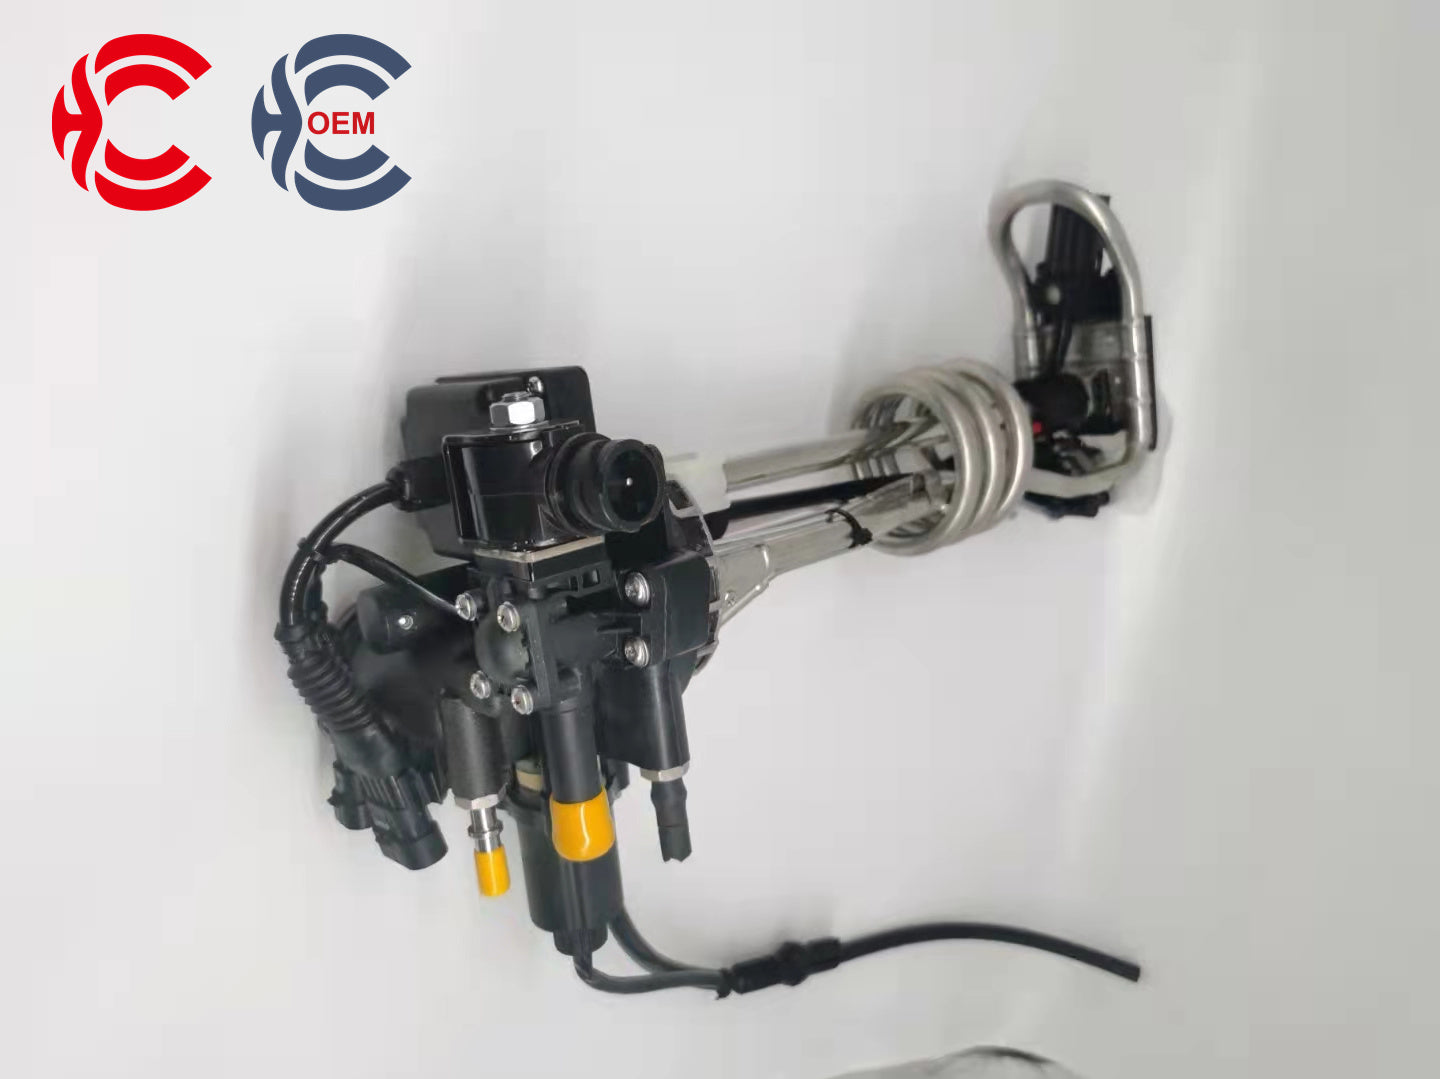 OEM: X10010966 JKA01582 HENGHEMaterial: ABS metalColor: black silverOrigin: Made in ChinaWeight: 1000gPacking List: 1* Adblue Pump More ServiceWe can provide OEM Manufacturing serviceWe can Be your one-step solution for Auto PartsWe can provide technical scheme for you Feel Free to Contact Us, We will get back to you as soon as possible.